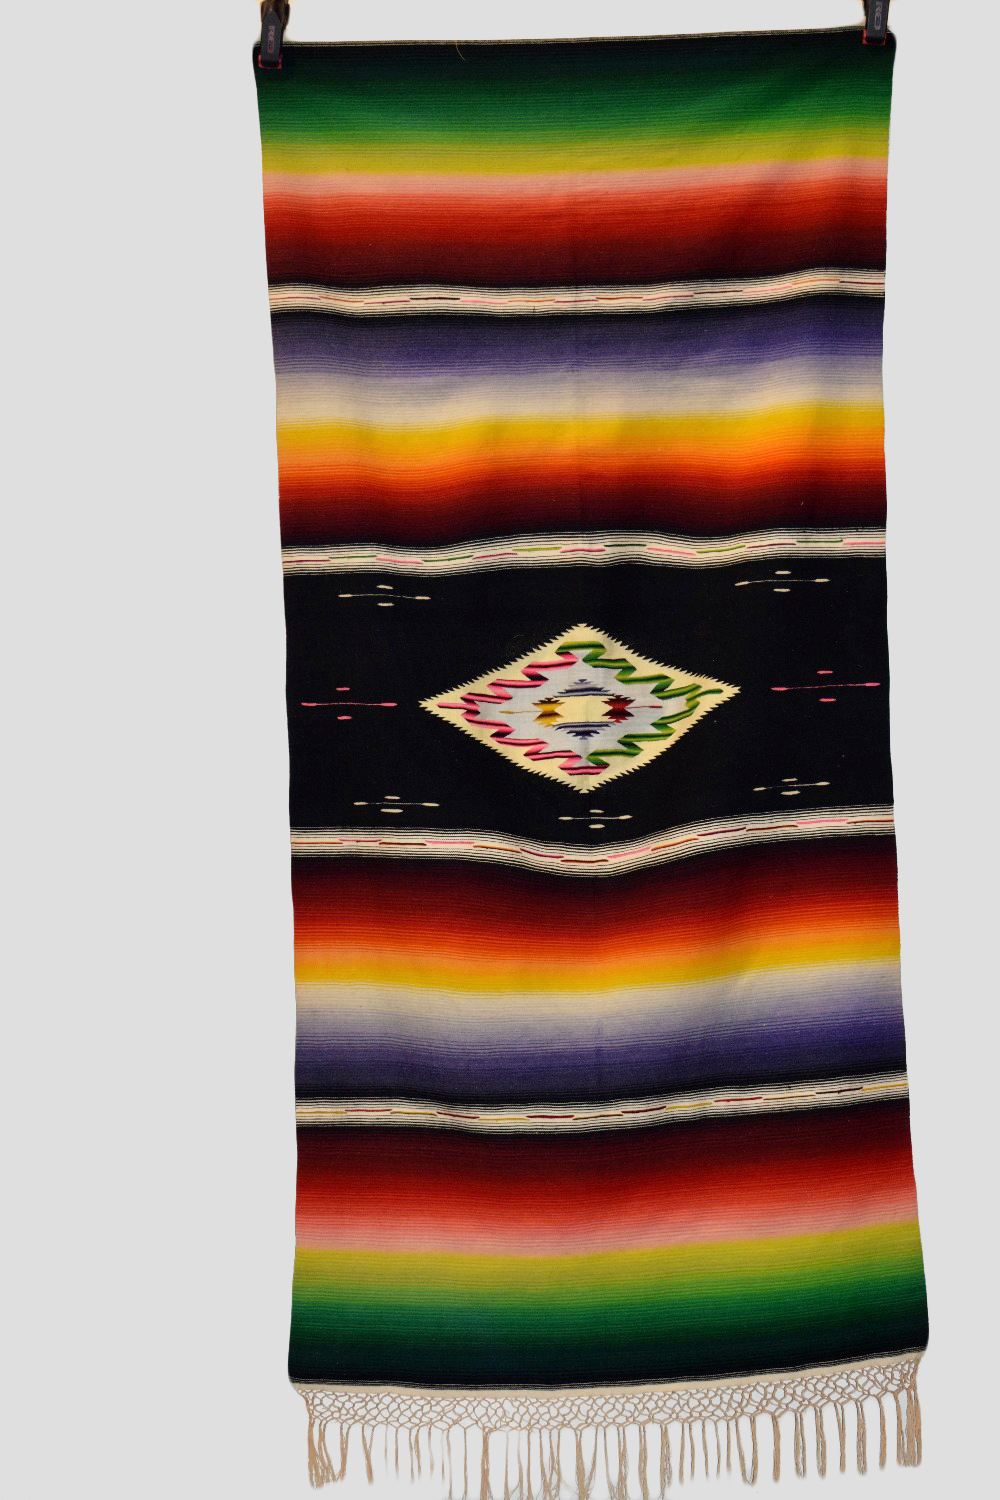 Mexican serape blanket, north America, mid-20th century, 68in. X 32in. 1.73m. X 0.81m. Woven in